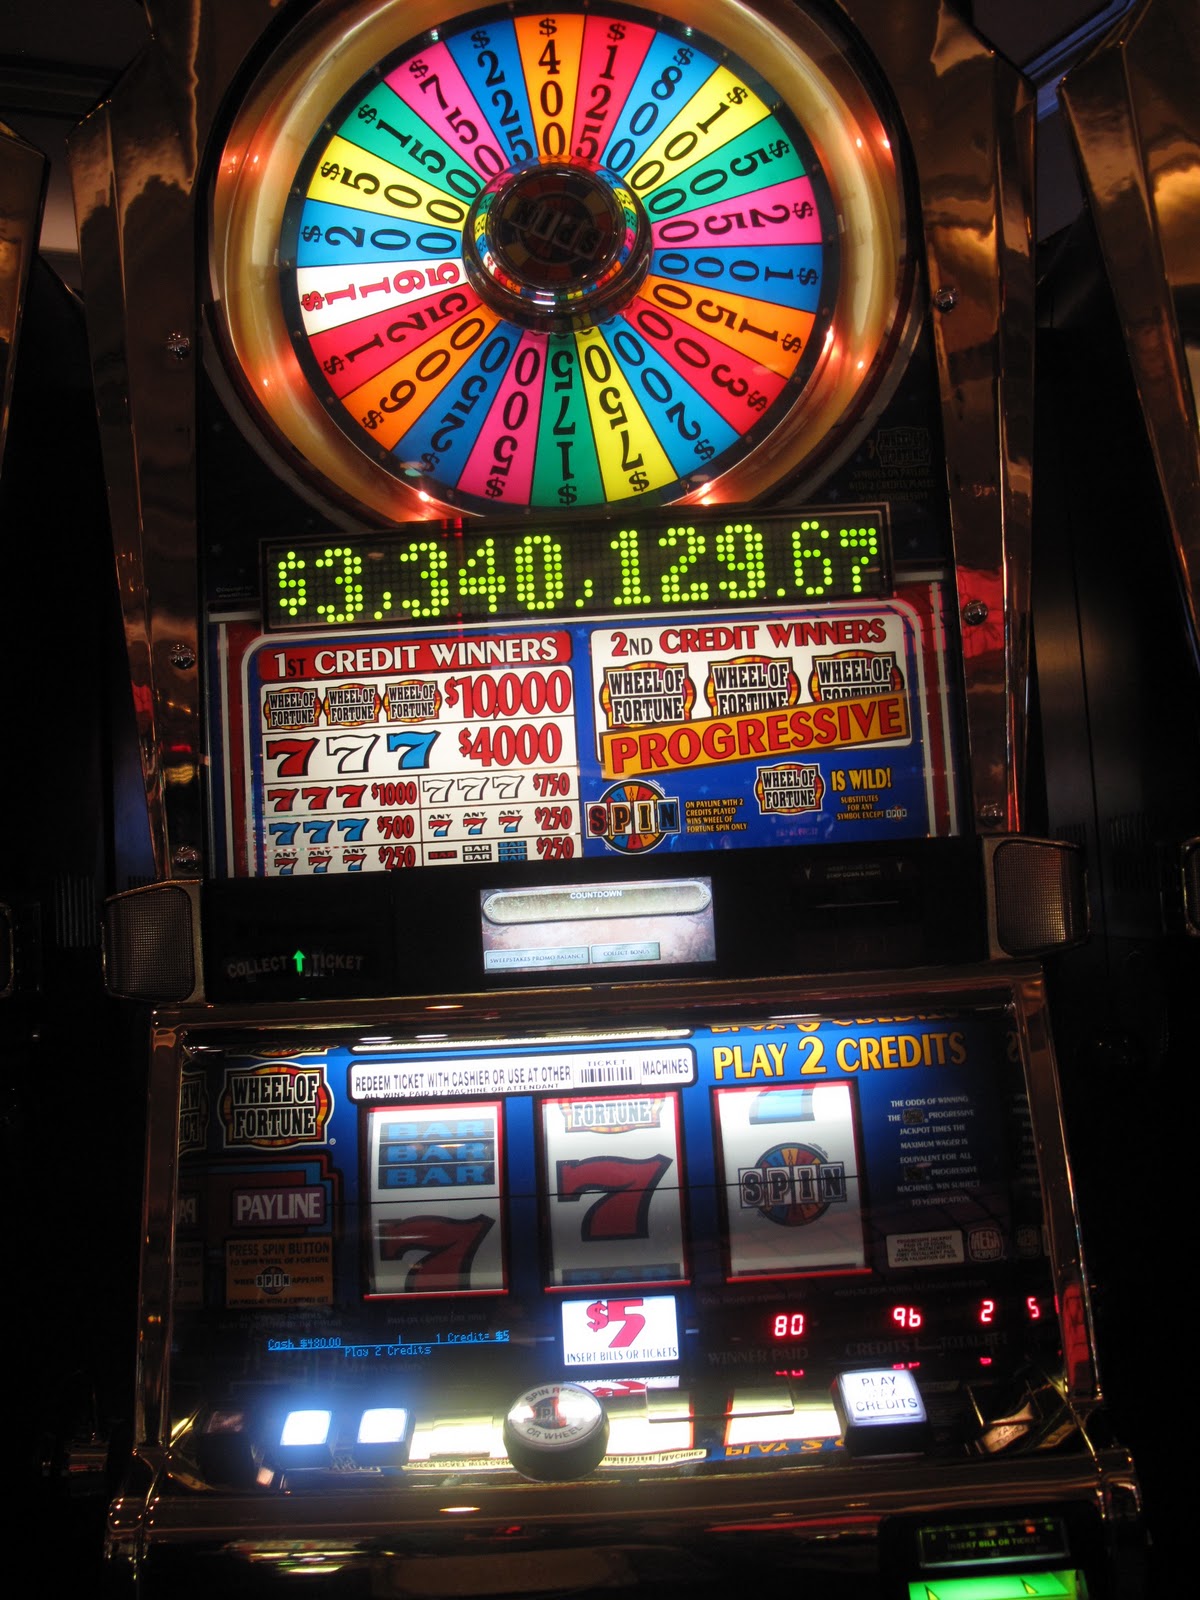 highest slot payouts in vegas